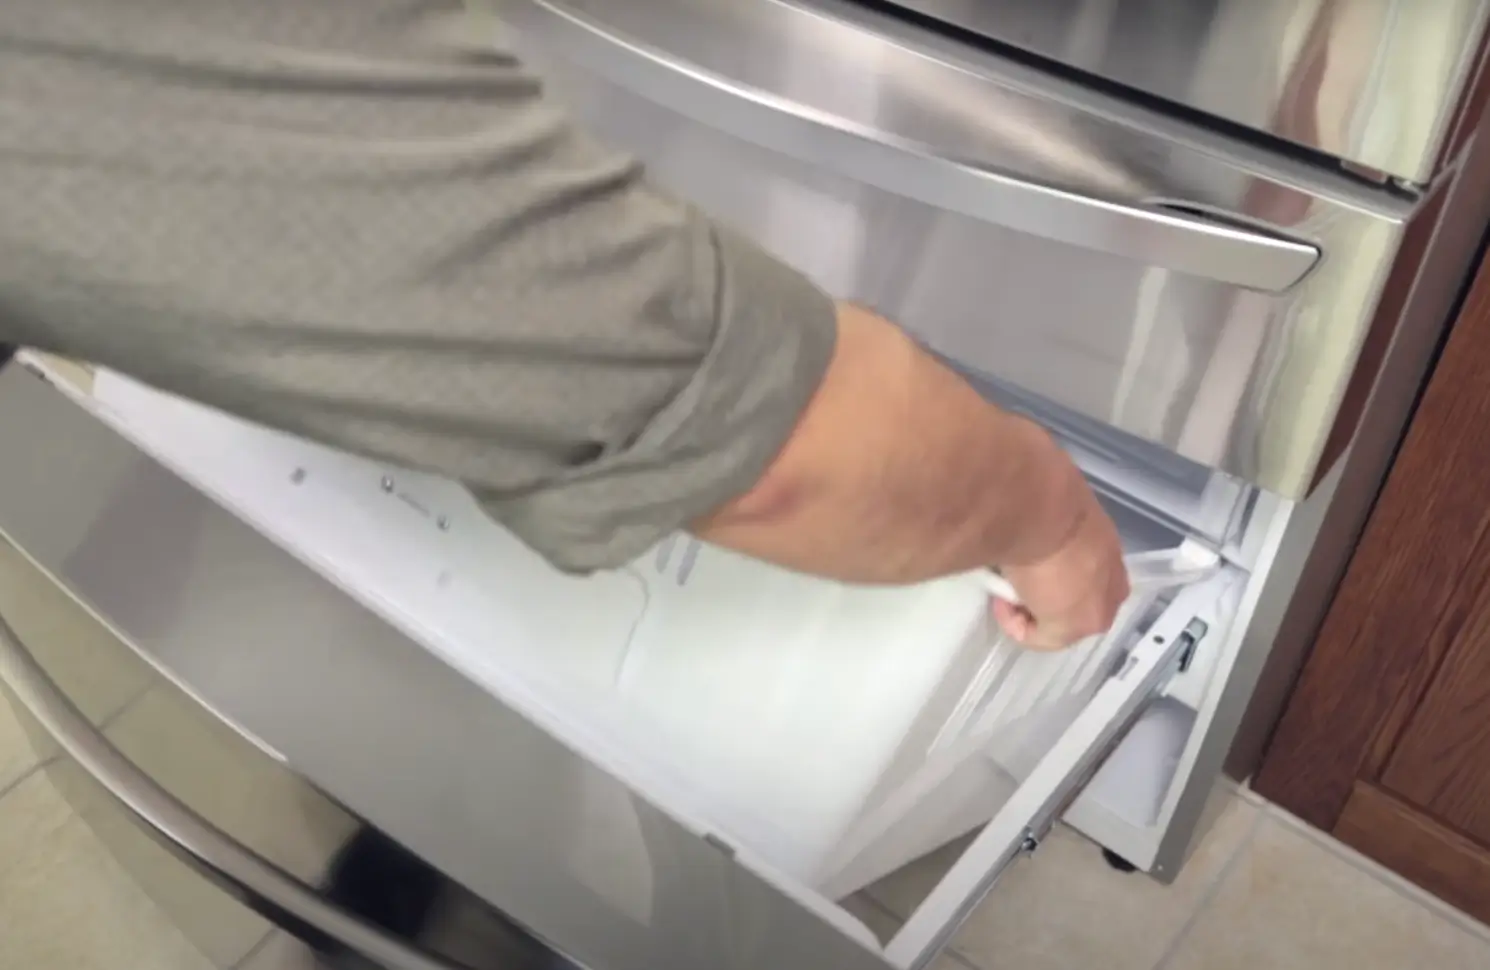 Image of removing the lower basket from the freezer